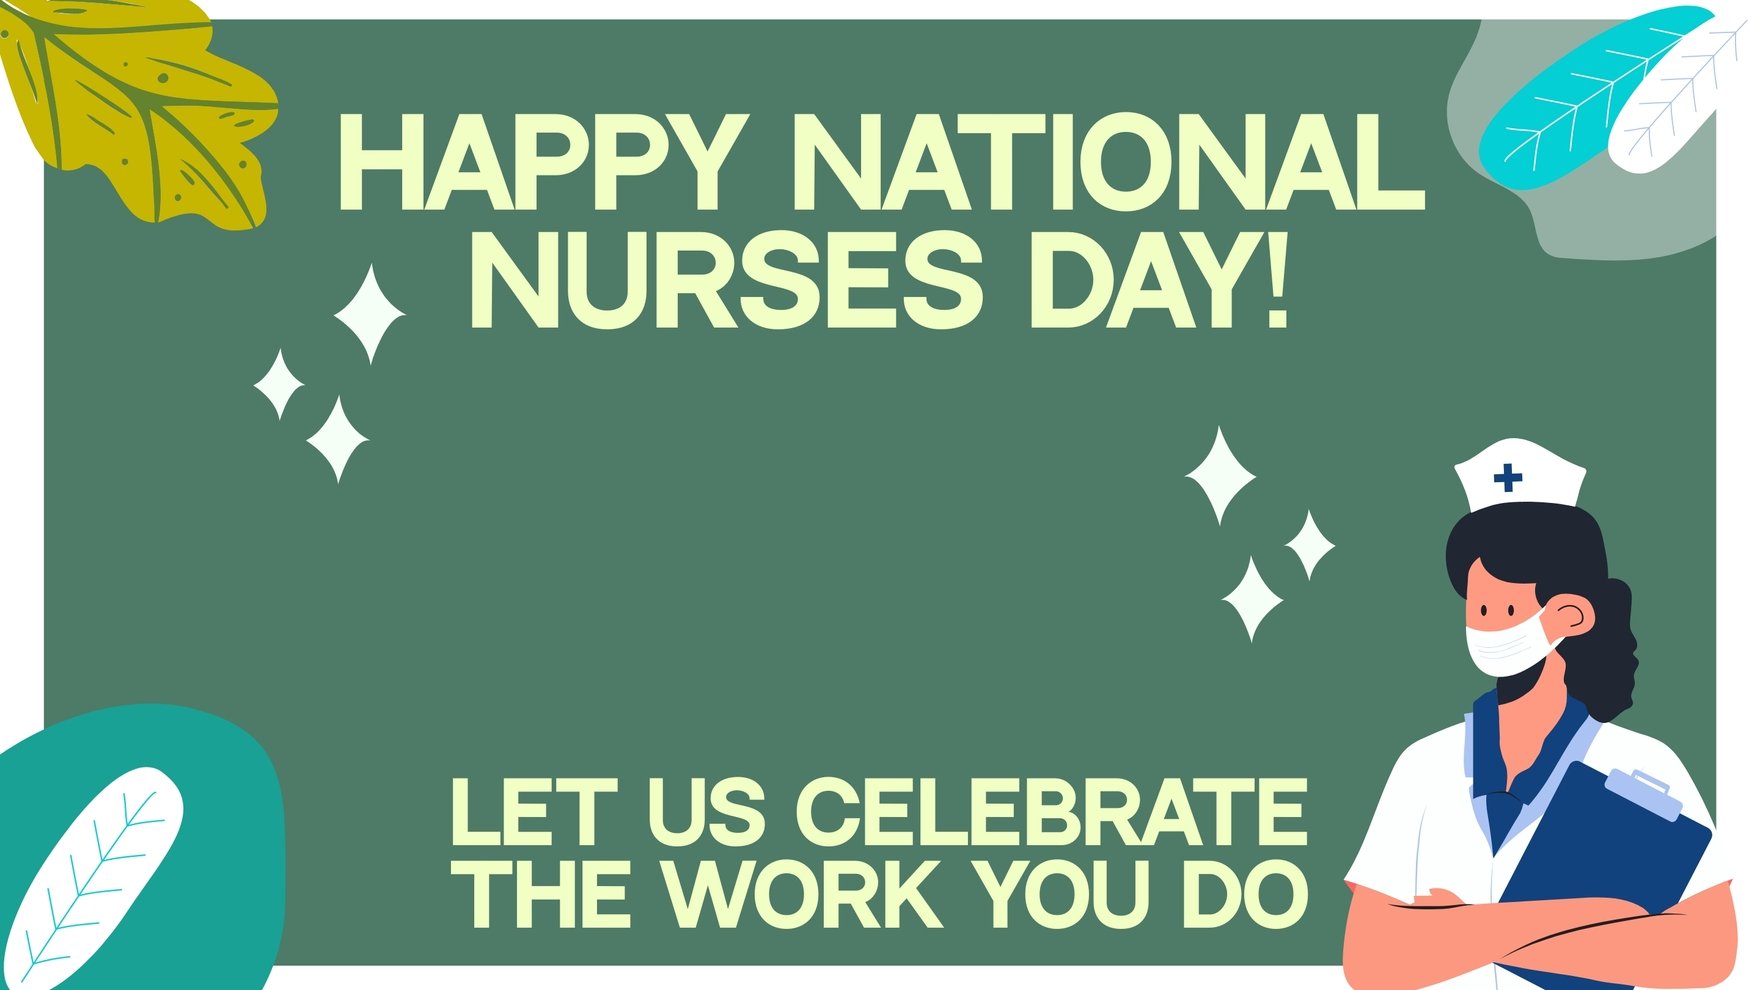 National Nurses Day Greeting Card Background Template